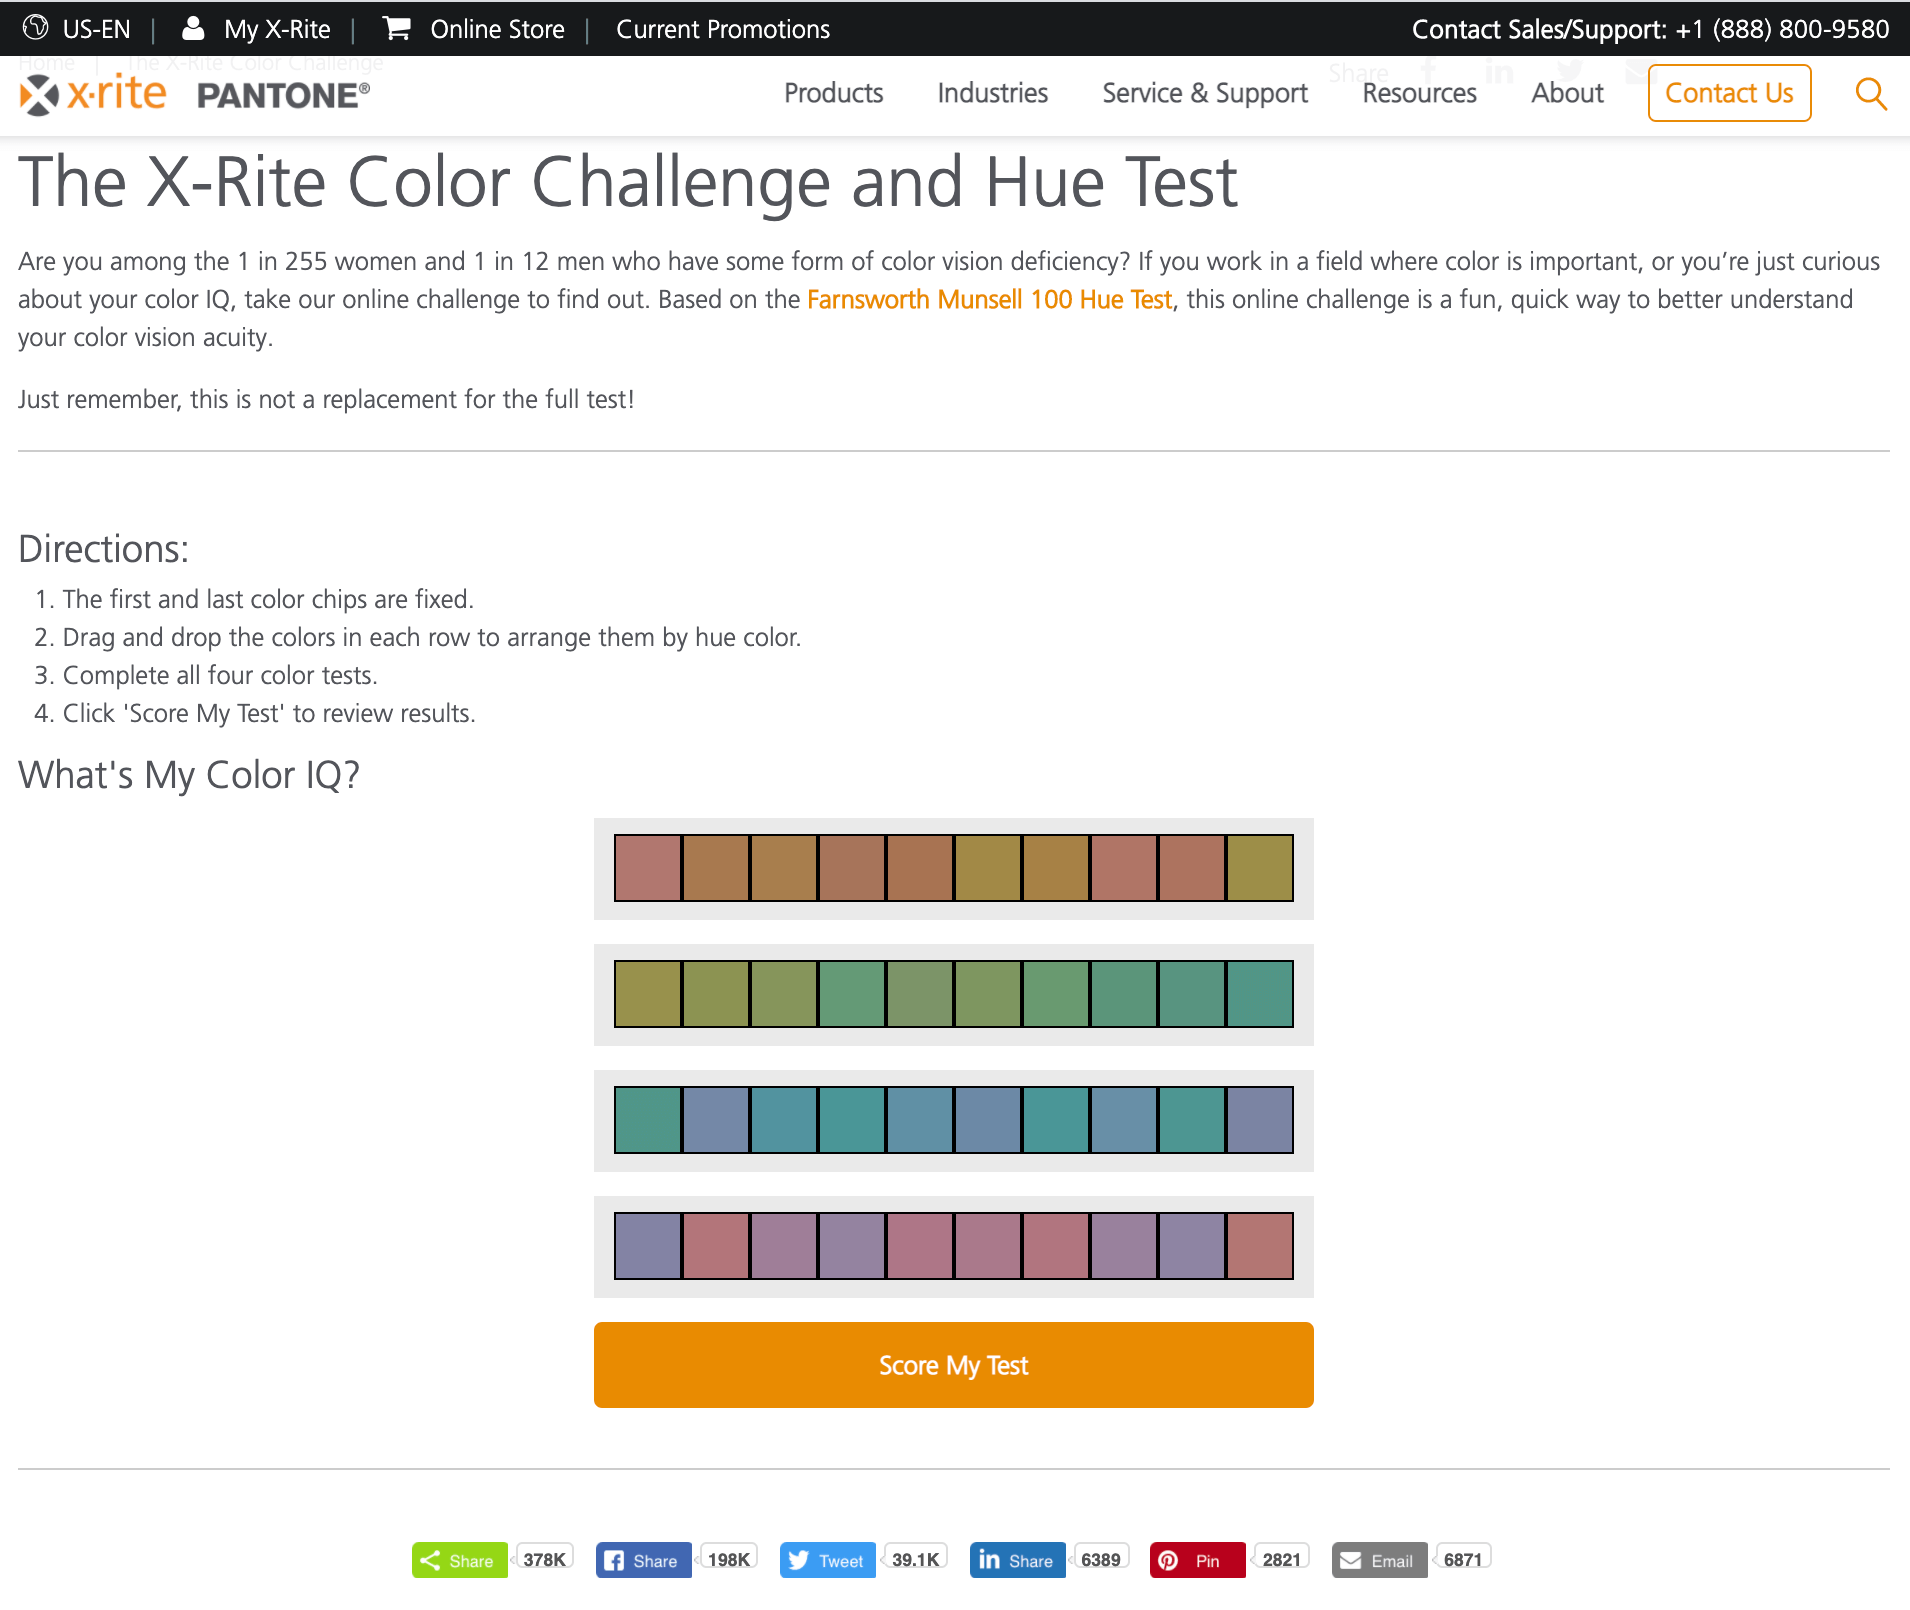 Screenshot of the X-Rite Color Challenge with over 378,000 shares.